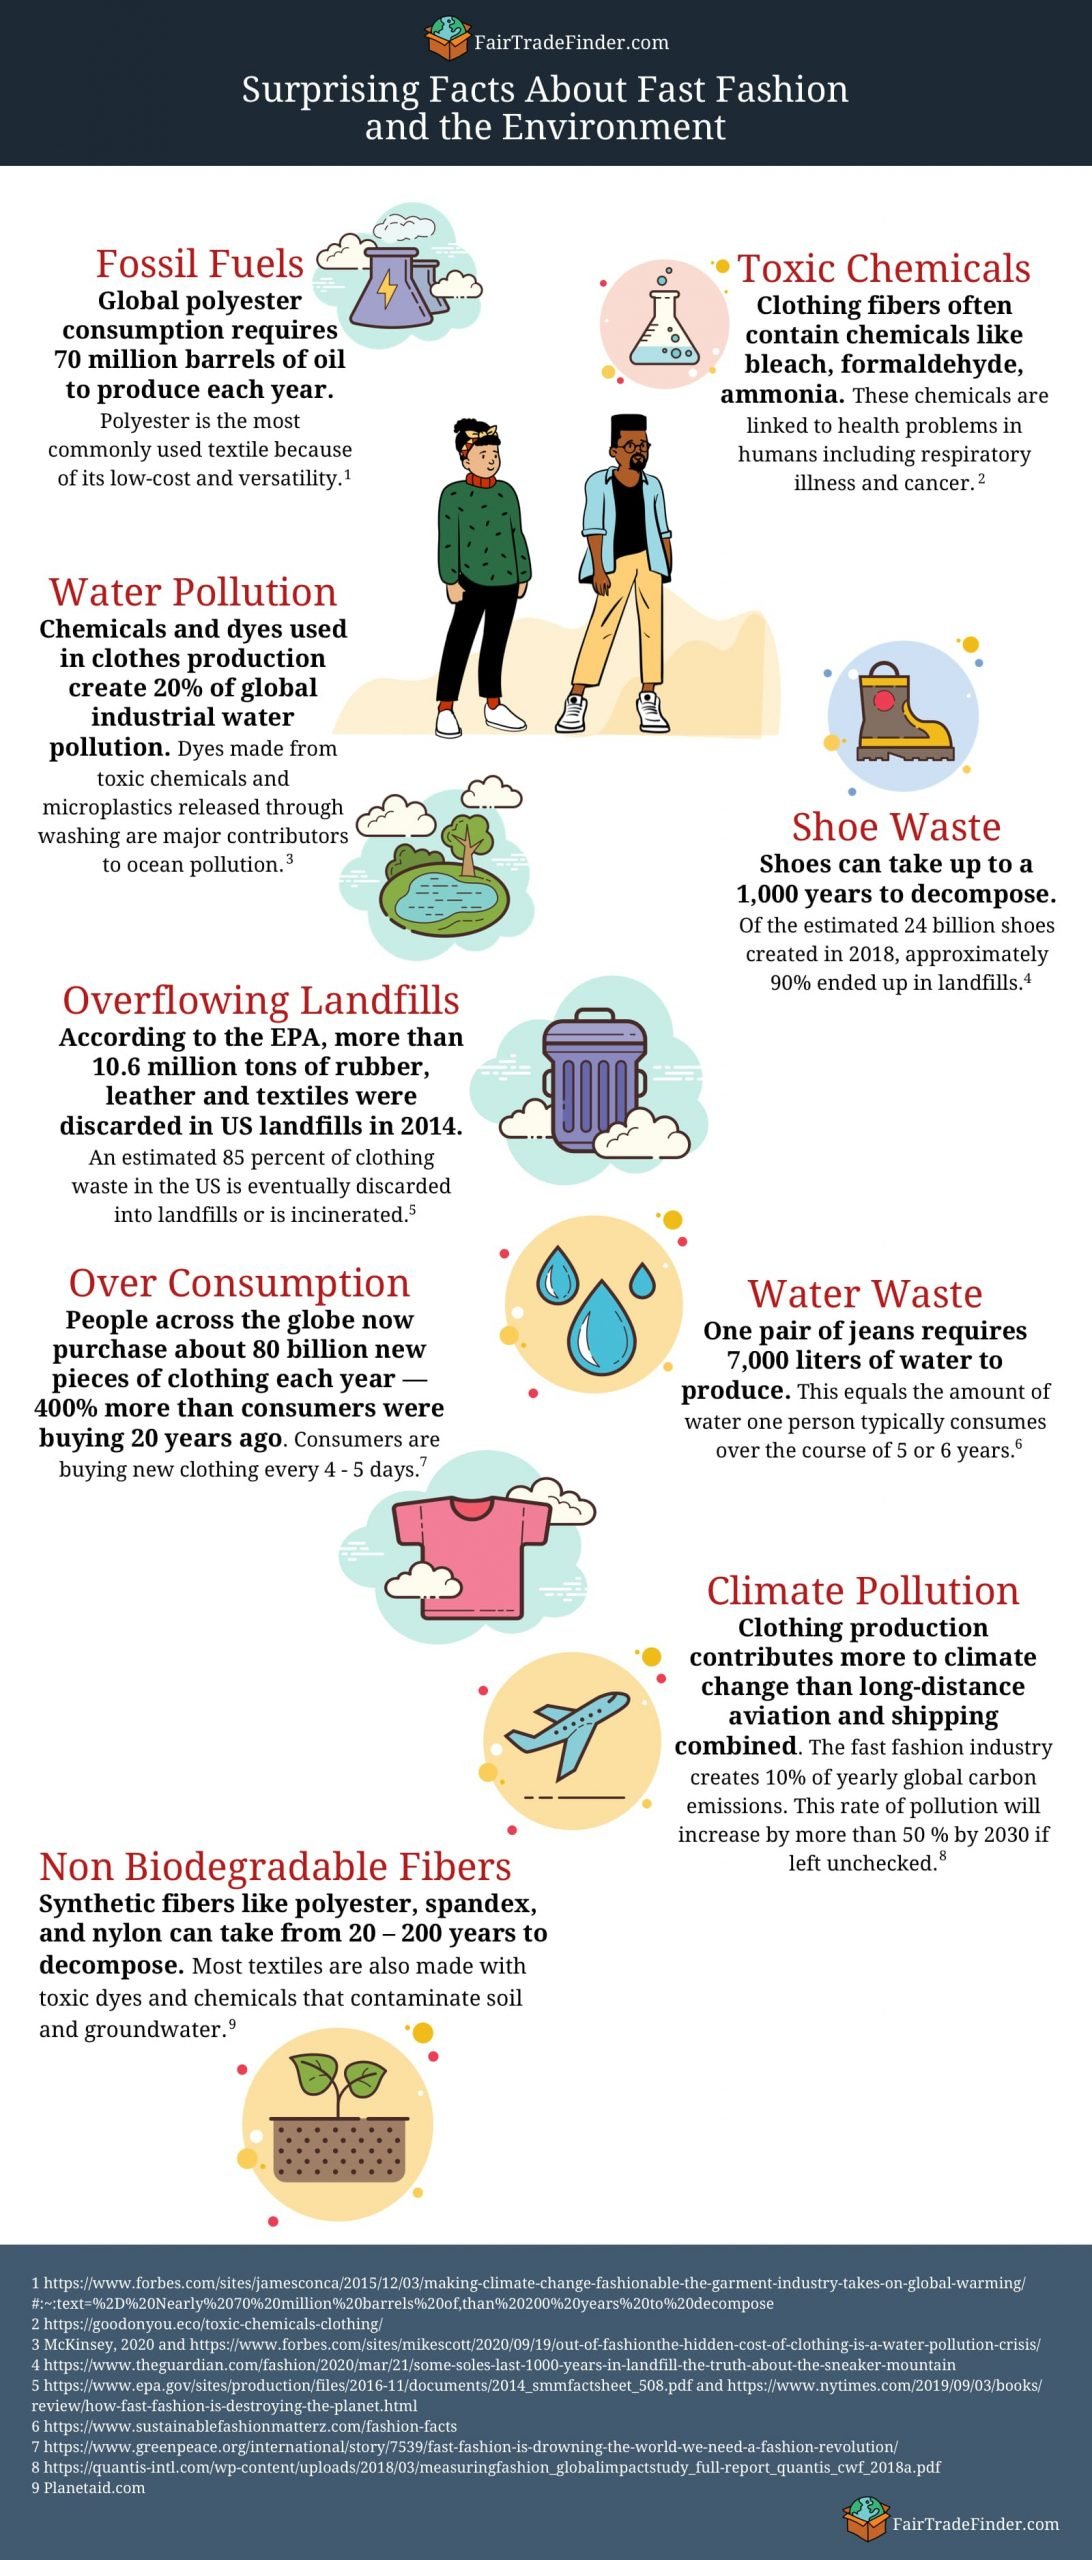 Surprising Facts About Fast Fashion and the Environment